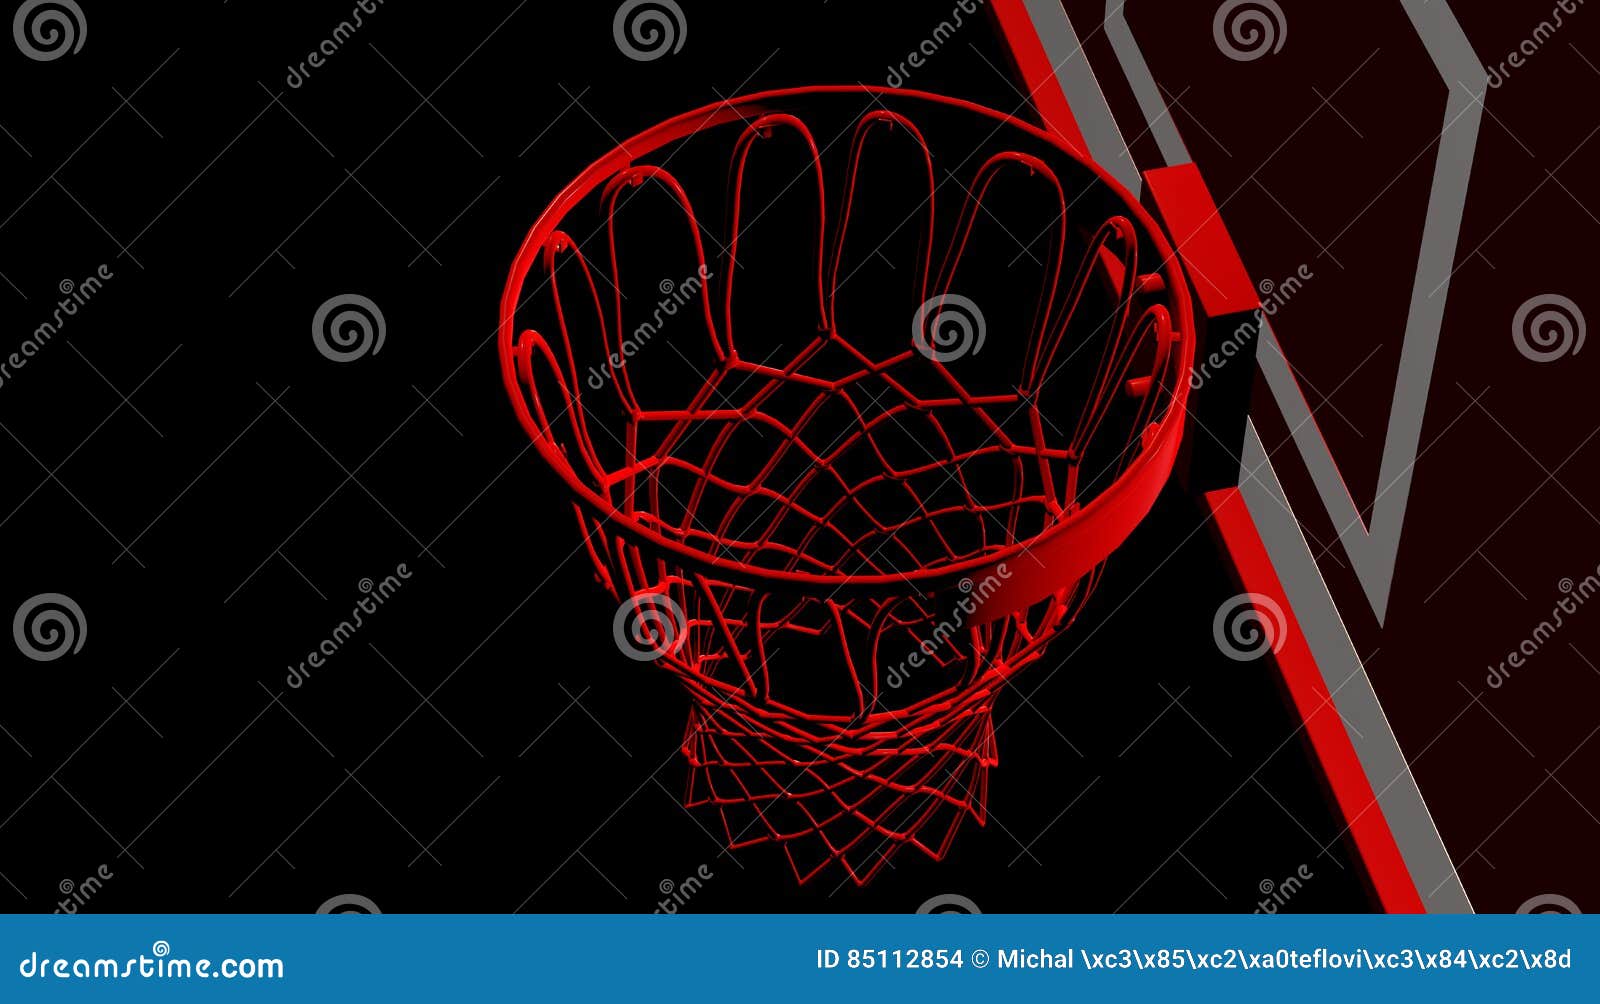 RED Net of a Basketball Hoop on Various Material and Background